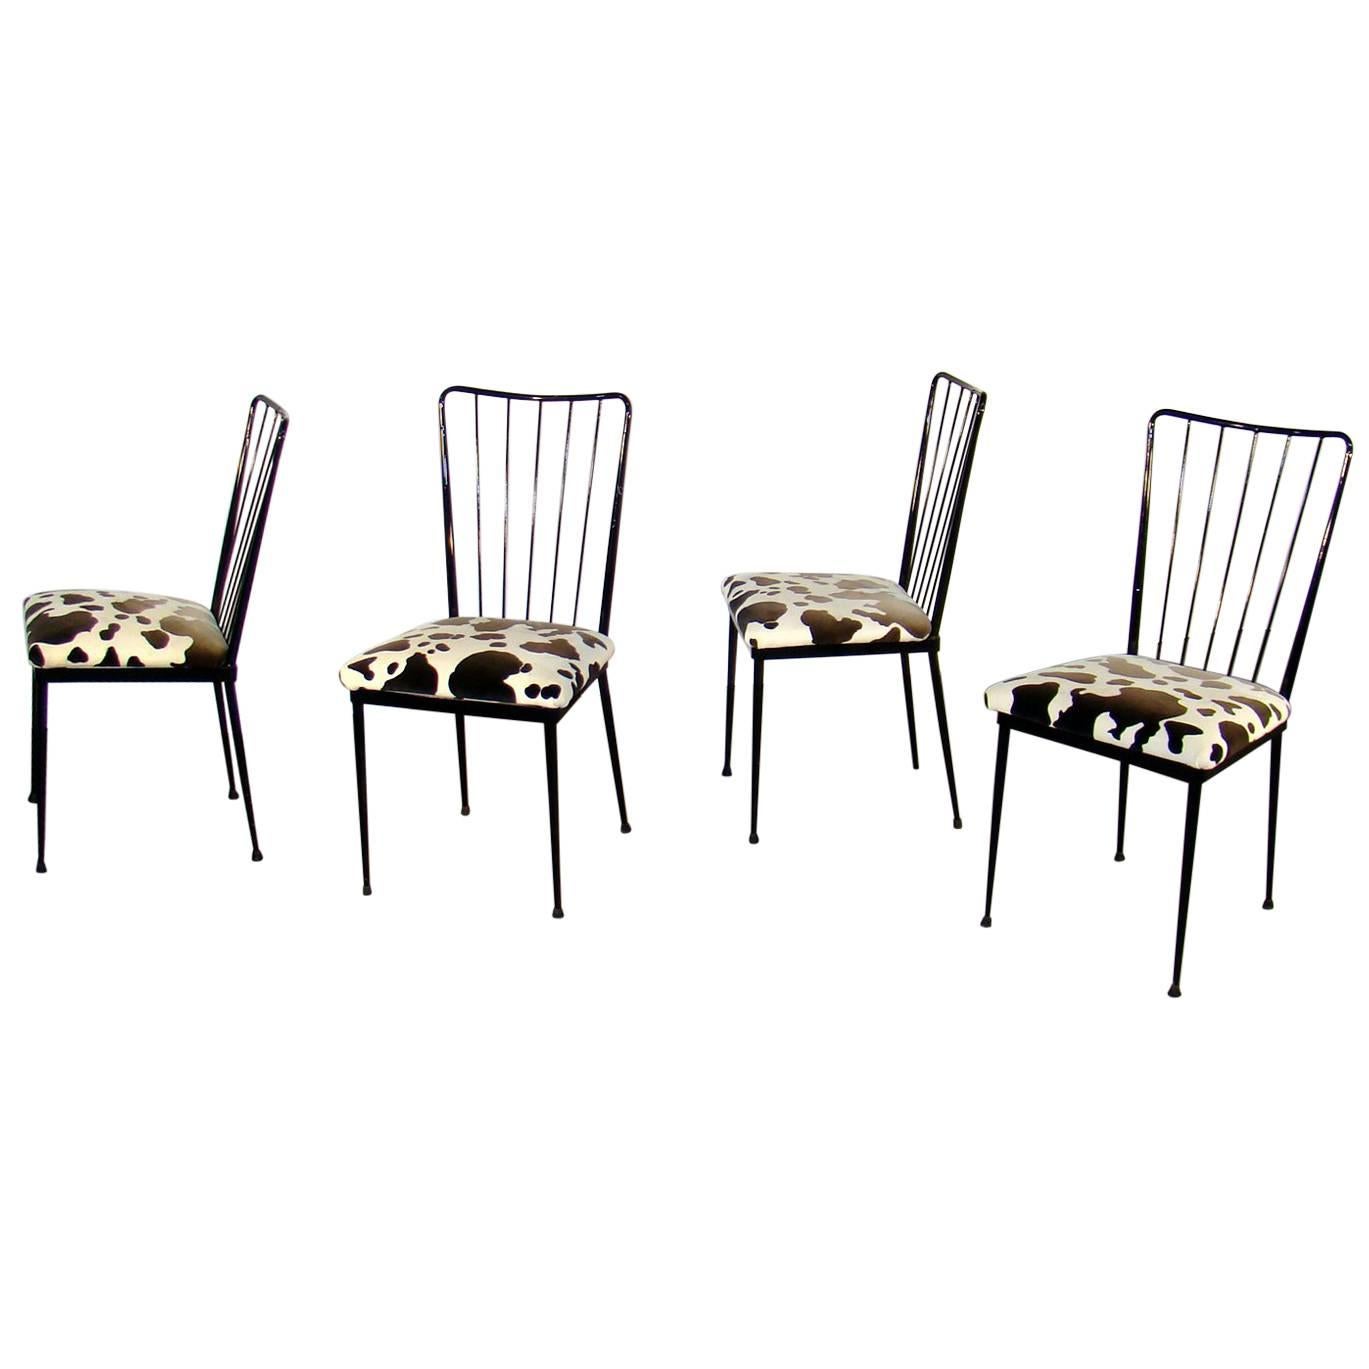 Four Chairs in Lacquered Metal in the Style of Colette Gueden, circa 1960 For Sale